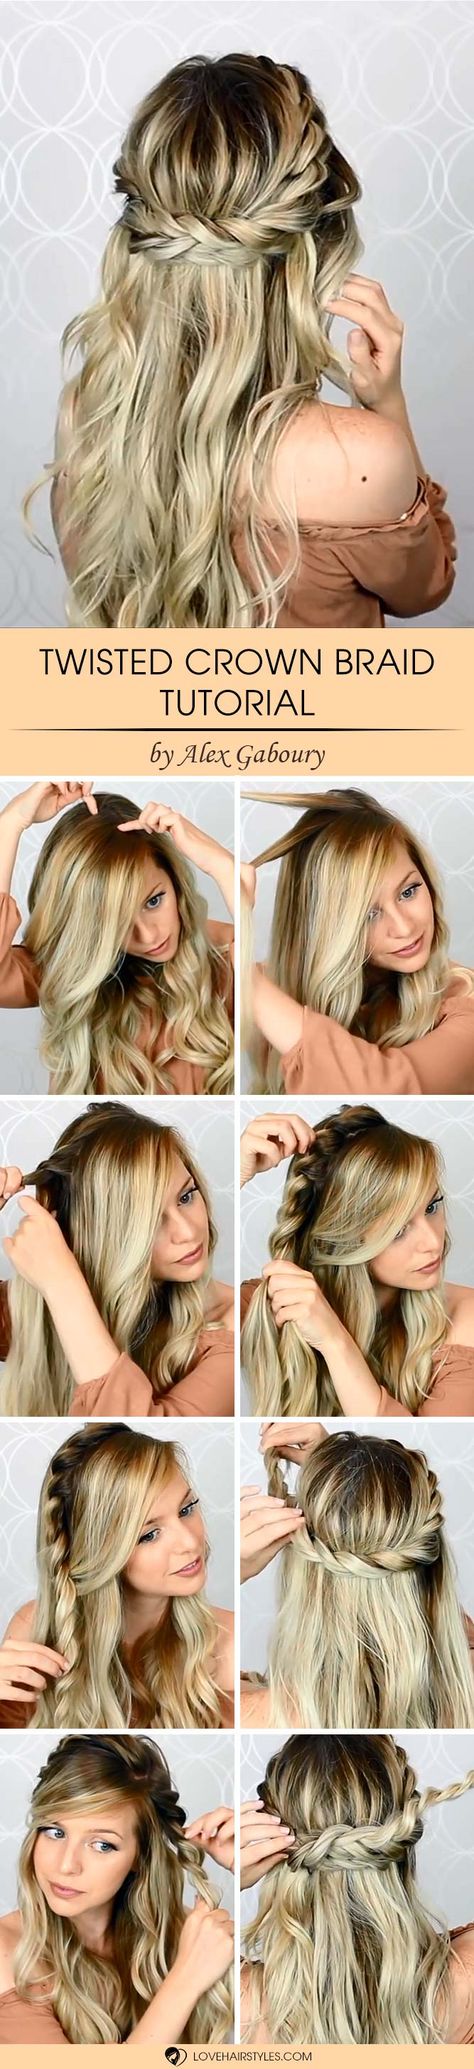 This twisted crown braid tutorial allows you to master a lovely look in just several minutes. Even an amateur can repeat these steps.